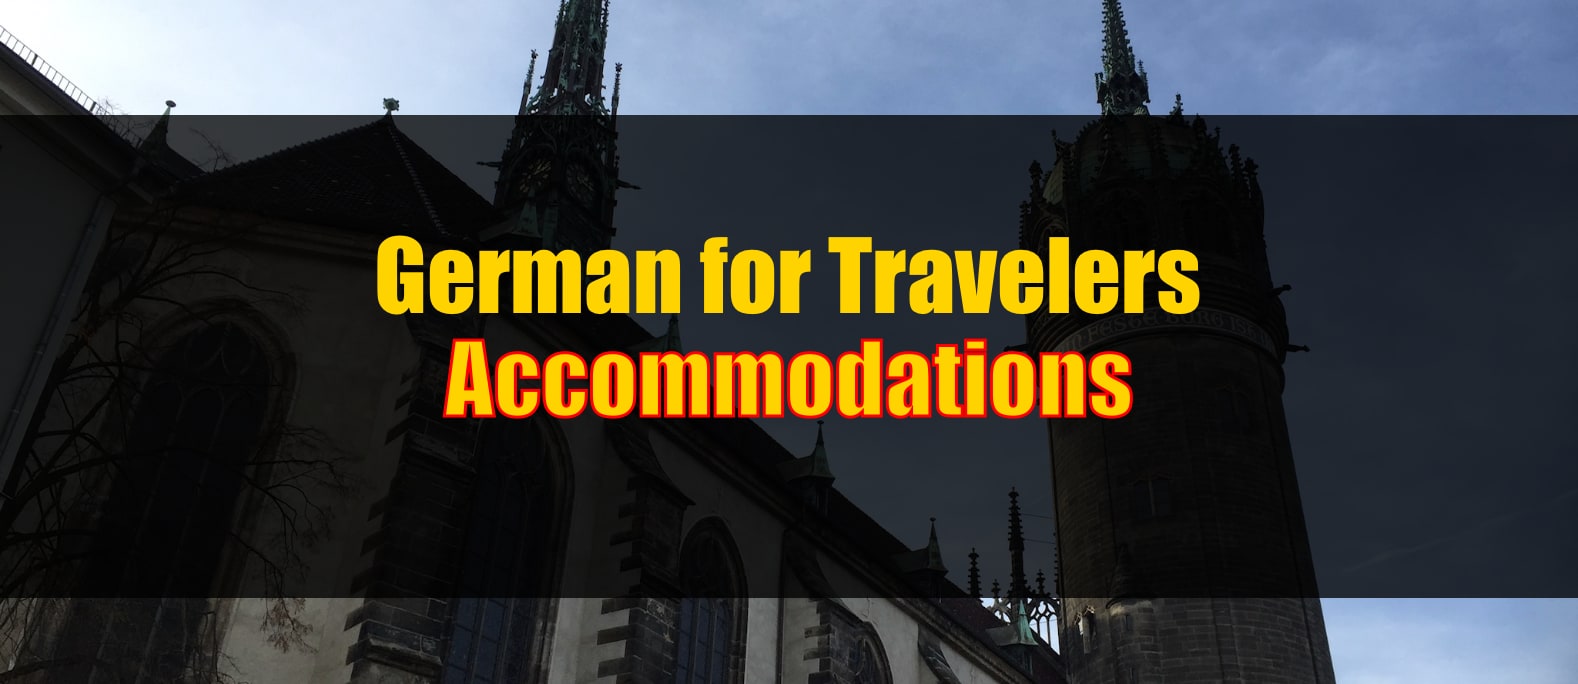 German for Travelers: Accommodations